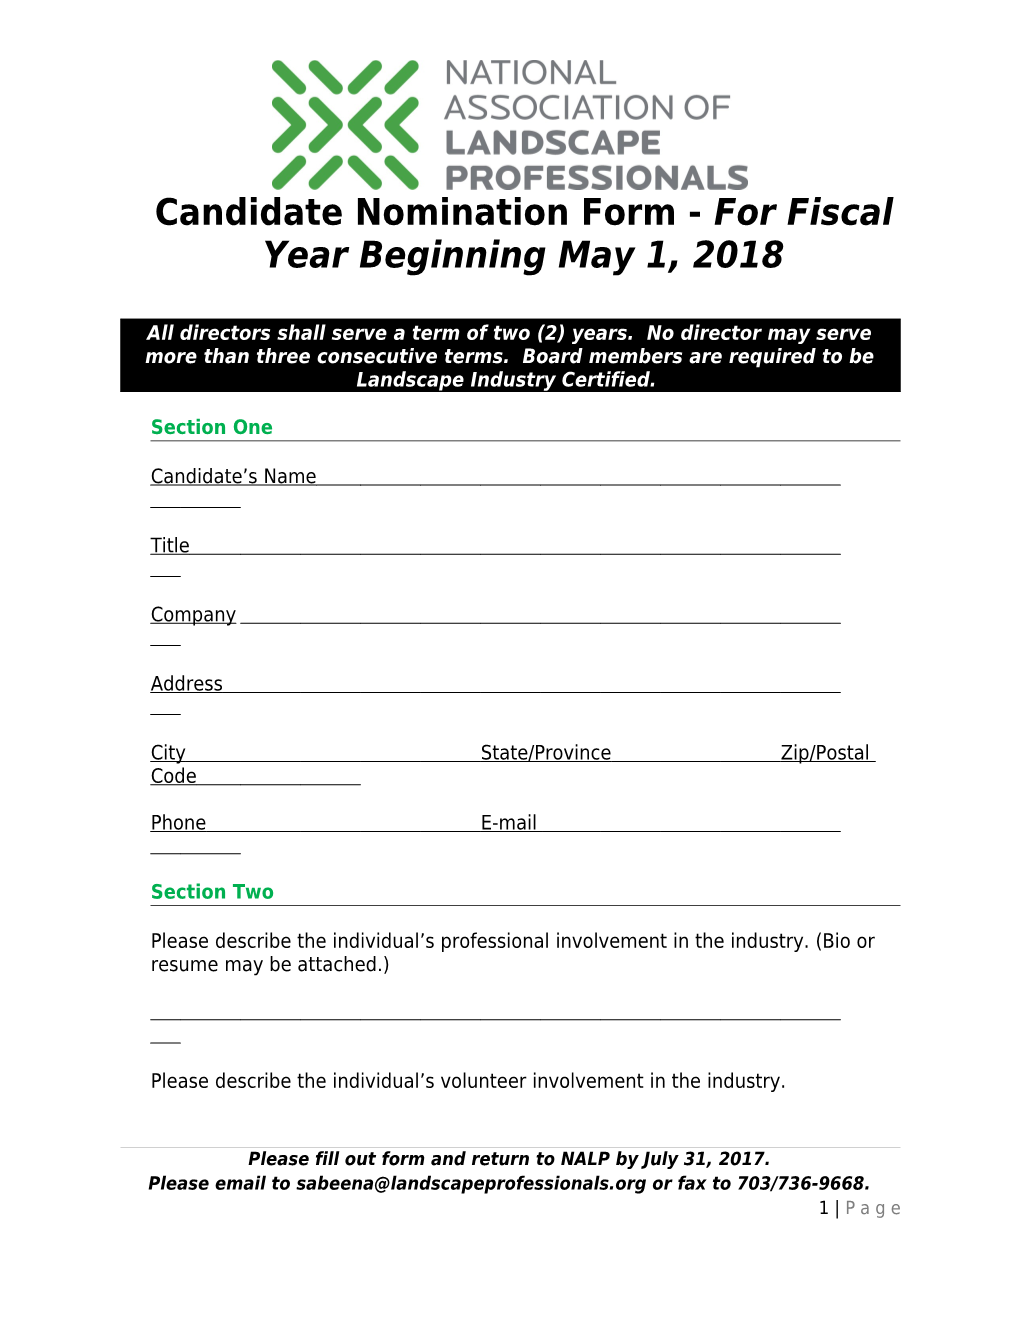 Candidate Nomination Form - for Fiscal Year Beginning May 1, 2018